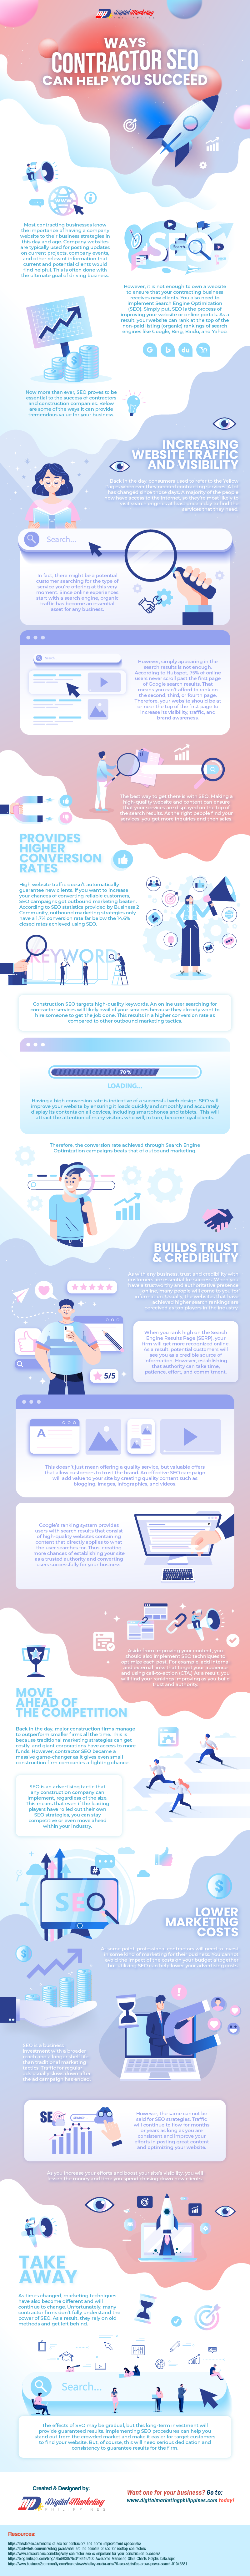 Ways Contractor SEO Can Help You Succeed [Infographic]